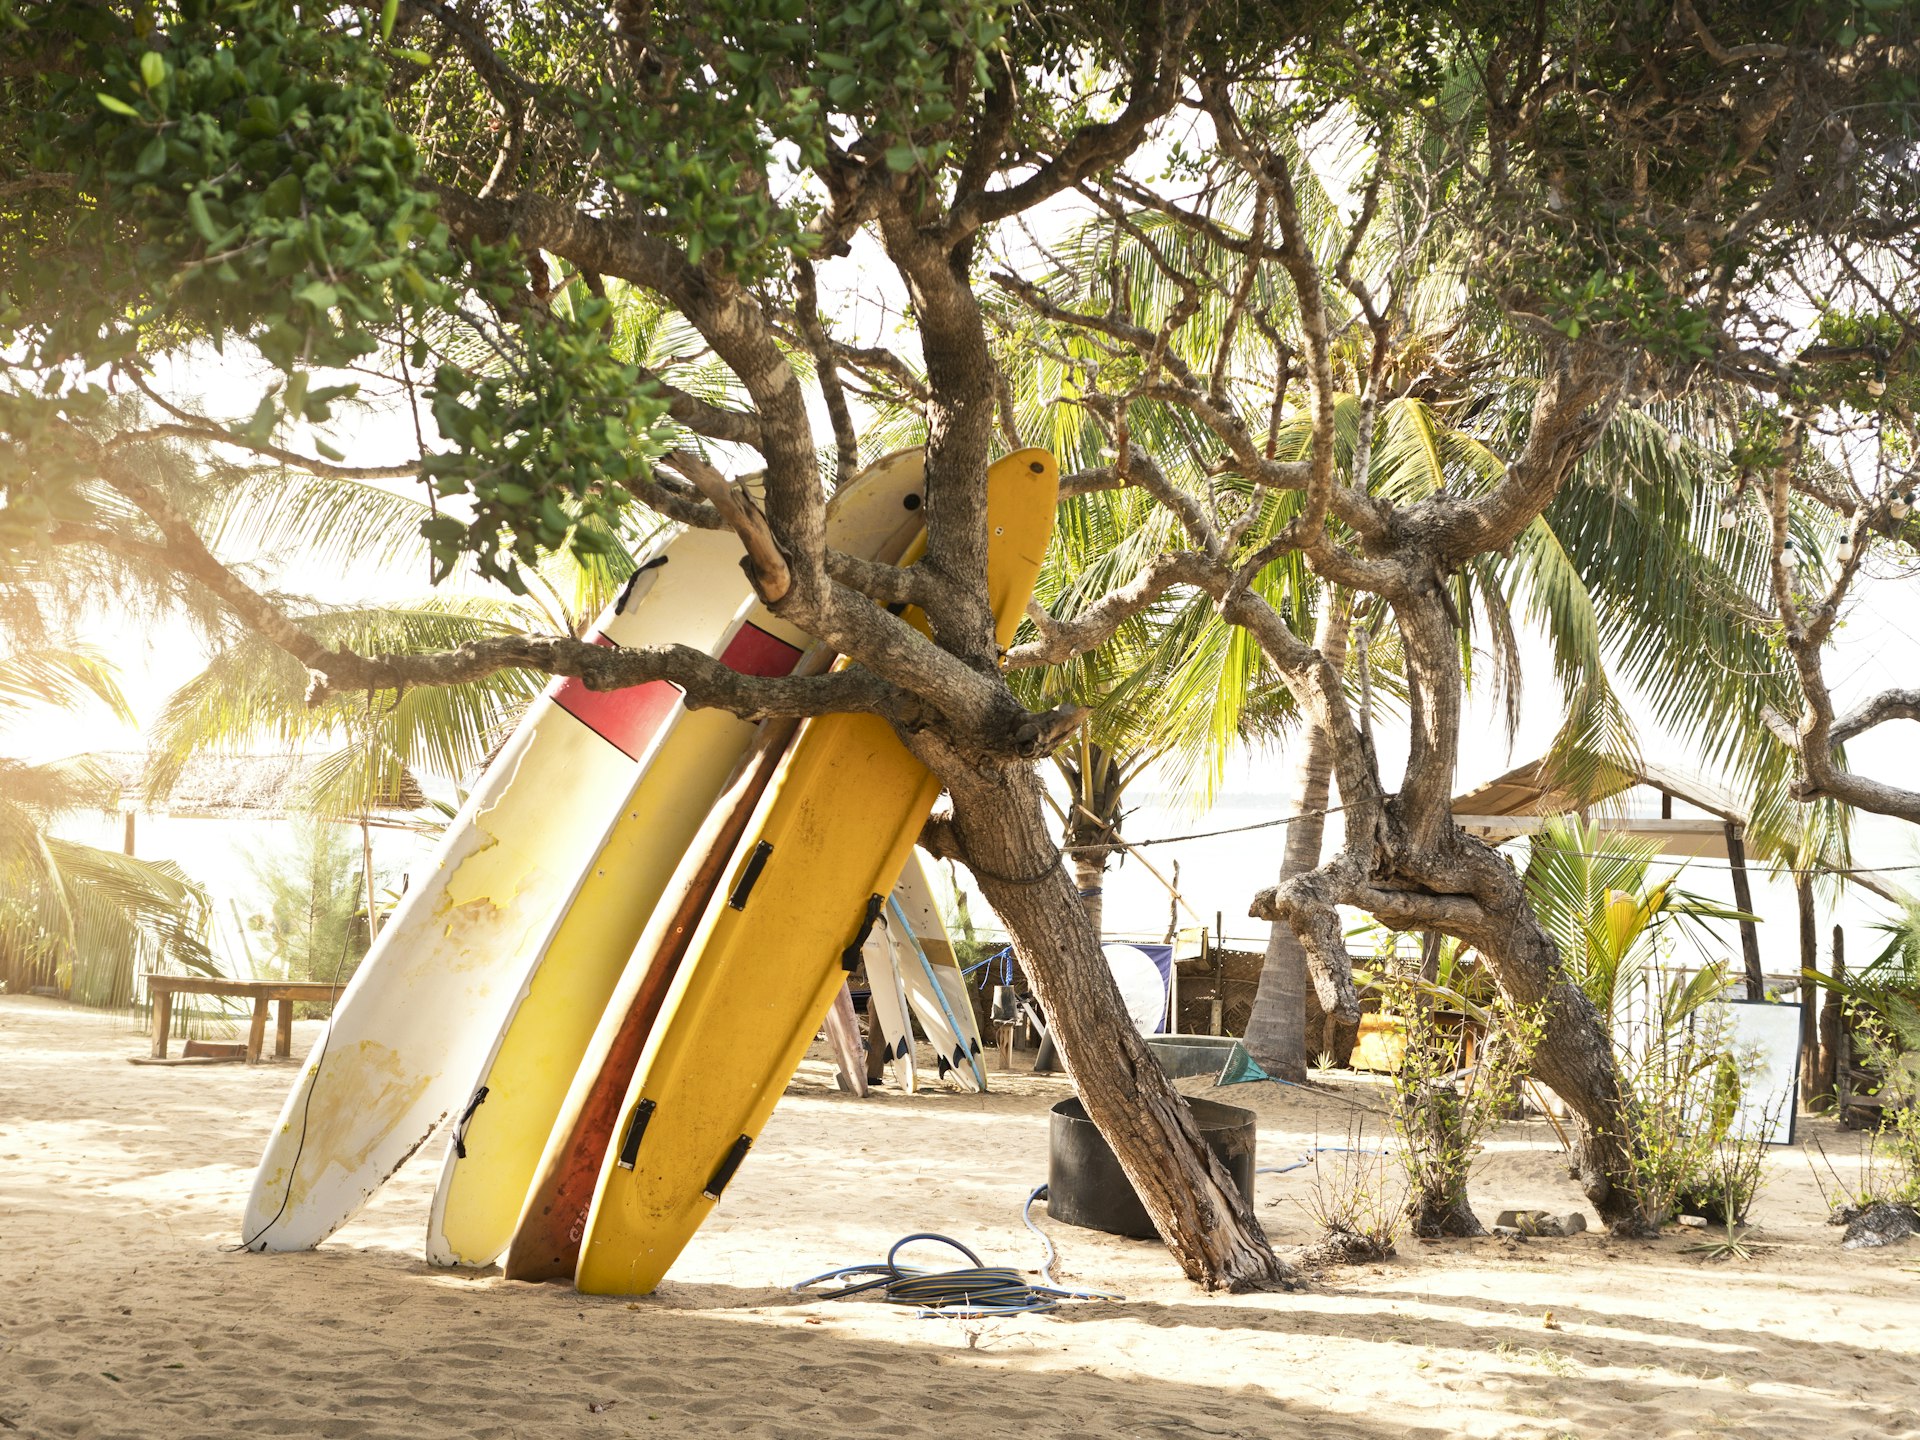 Surfboards leaning against a palm tree in a tropical beachside location